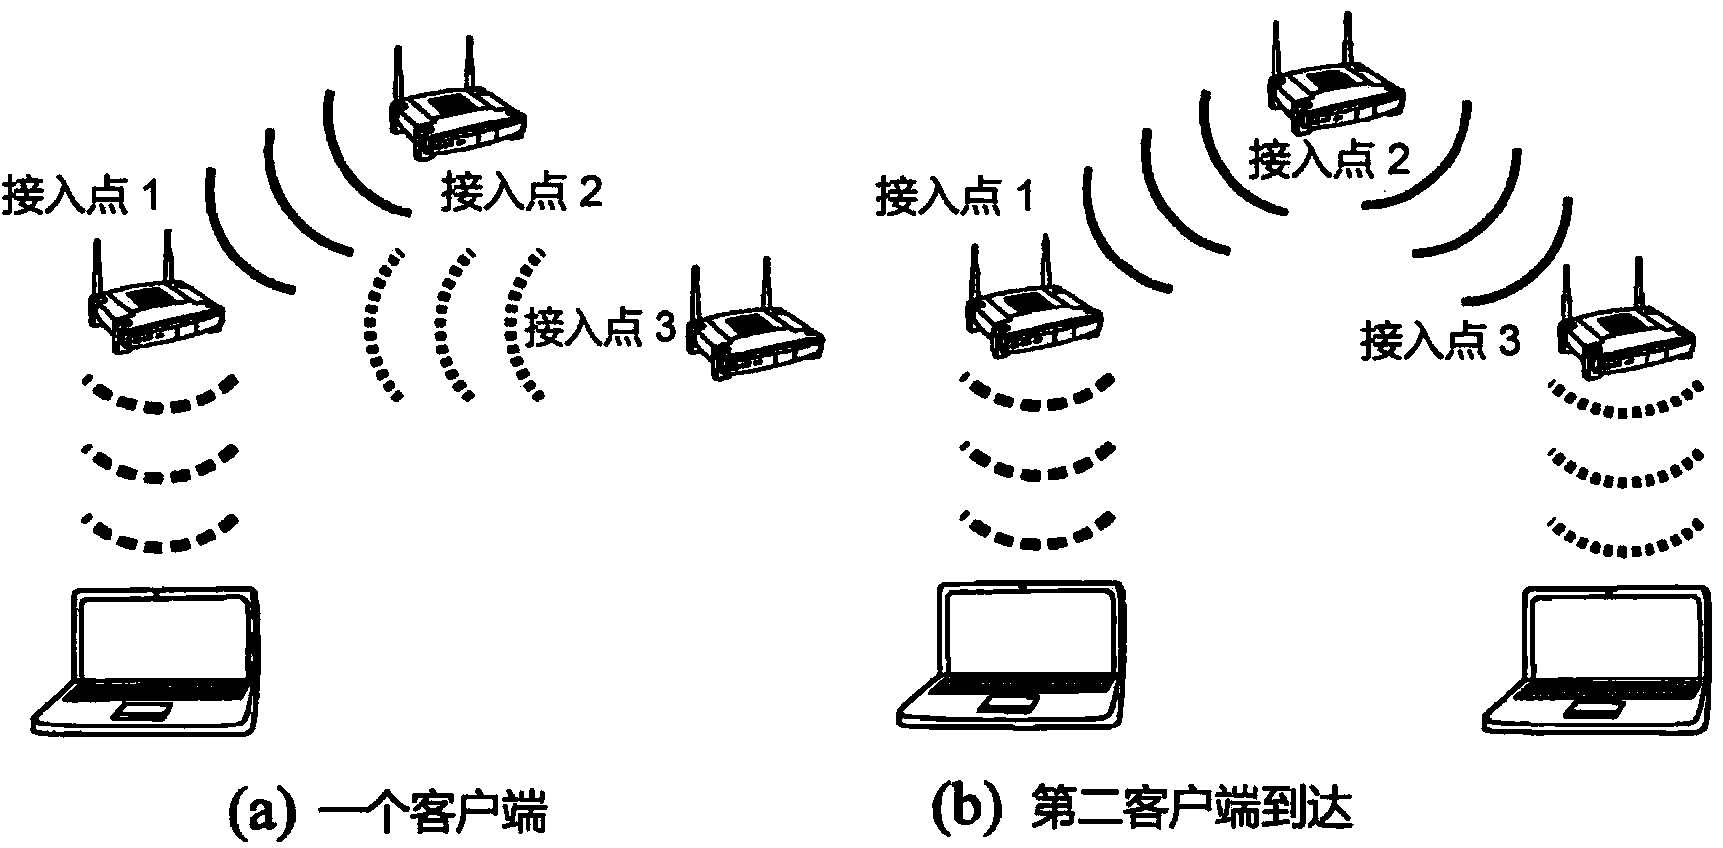 A method and a system for bandwidth aggregation in an access point